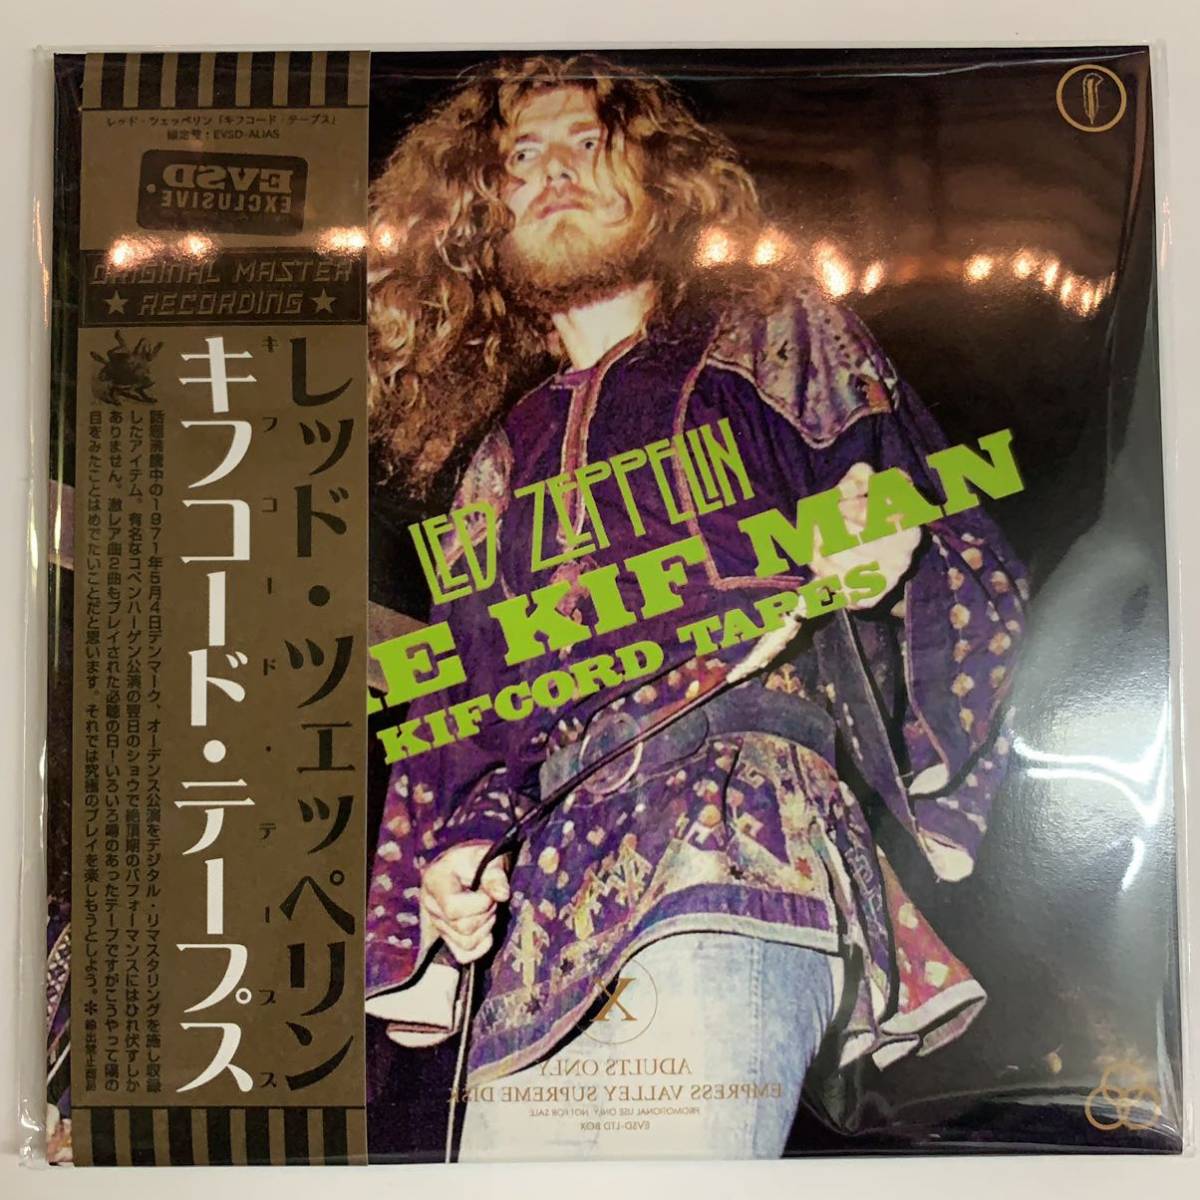 LED ZEPPELIN : THE KIF MAN “THE KIF CORD TAPES” 「キフコード・テープス」 2CD 工場プレス銀盤CD ■欧米輸入限定盤 限定特価！の画像1